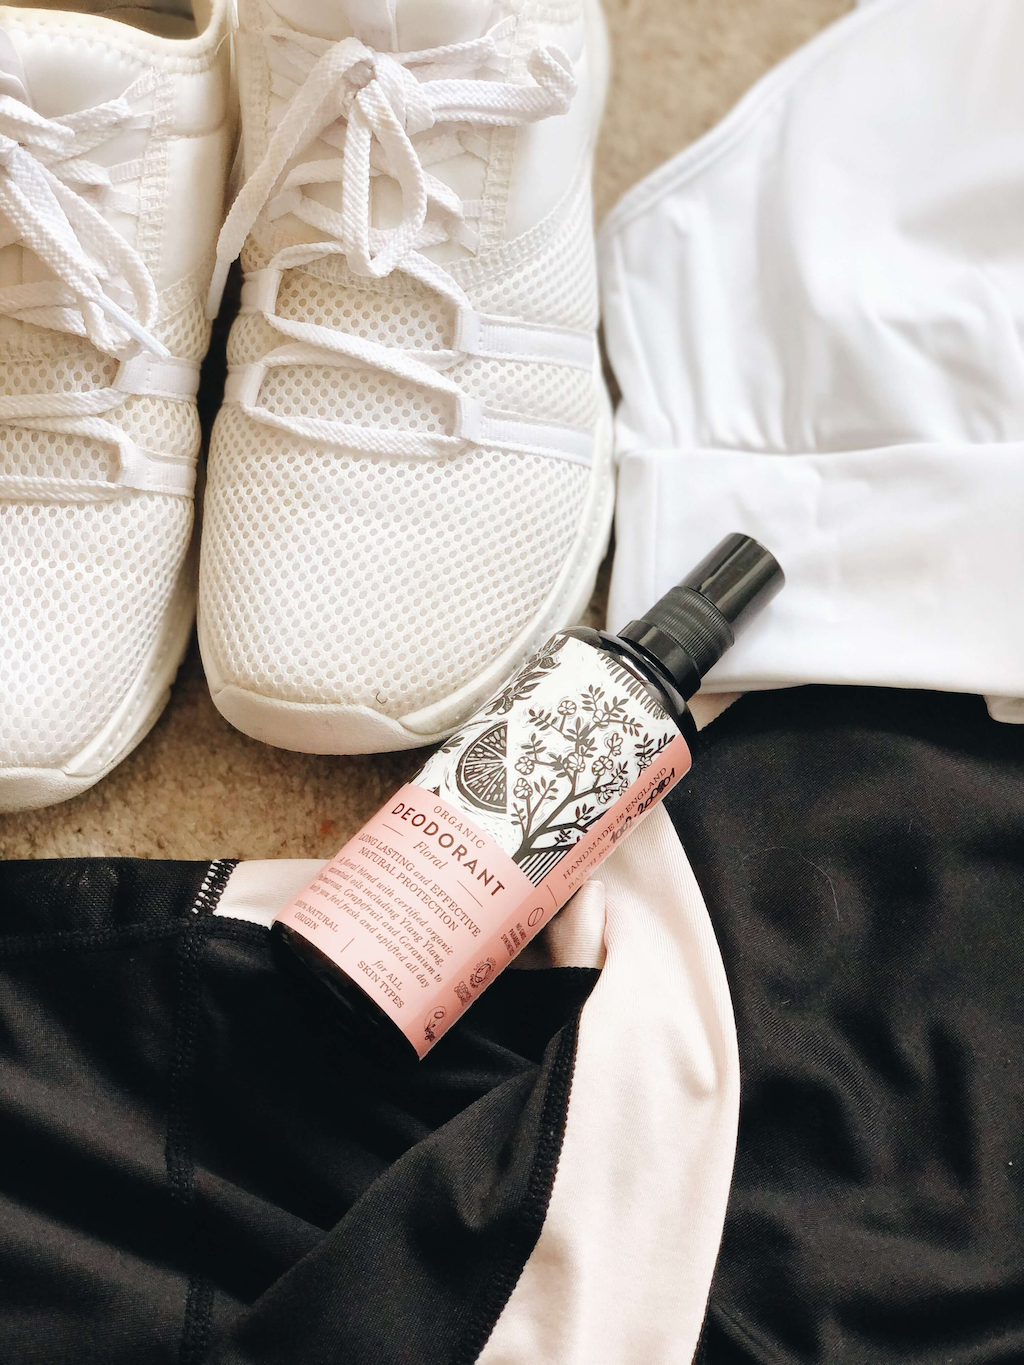 Haoma Organic Spray Deodorant. Natural spray deodorant. The Floral deodorant is sitting on some gym clothes with white trainers next to it.